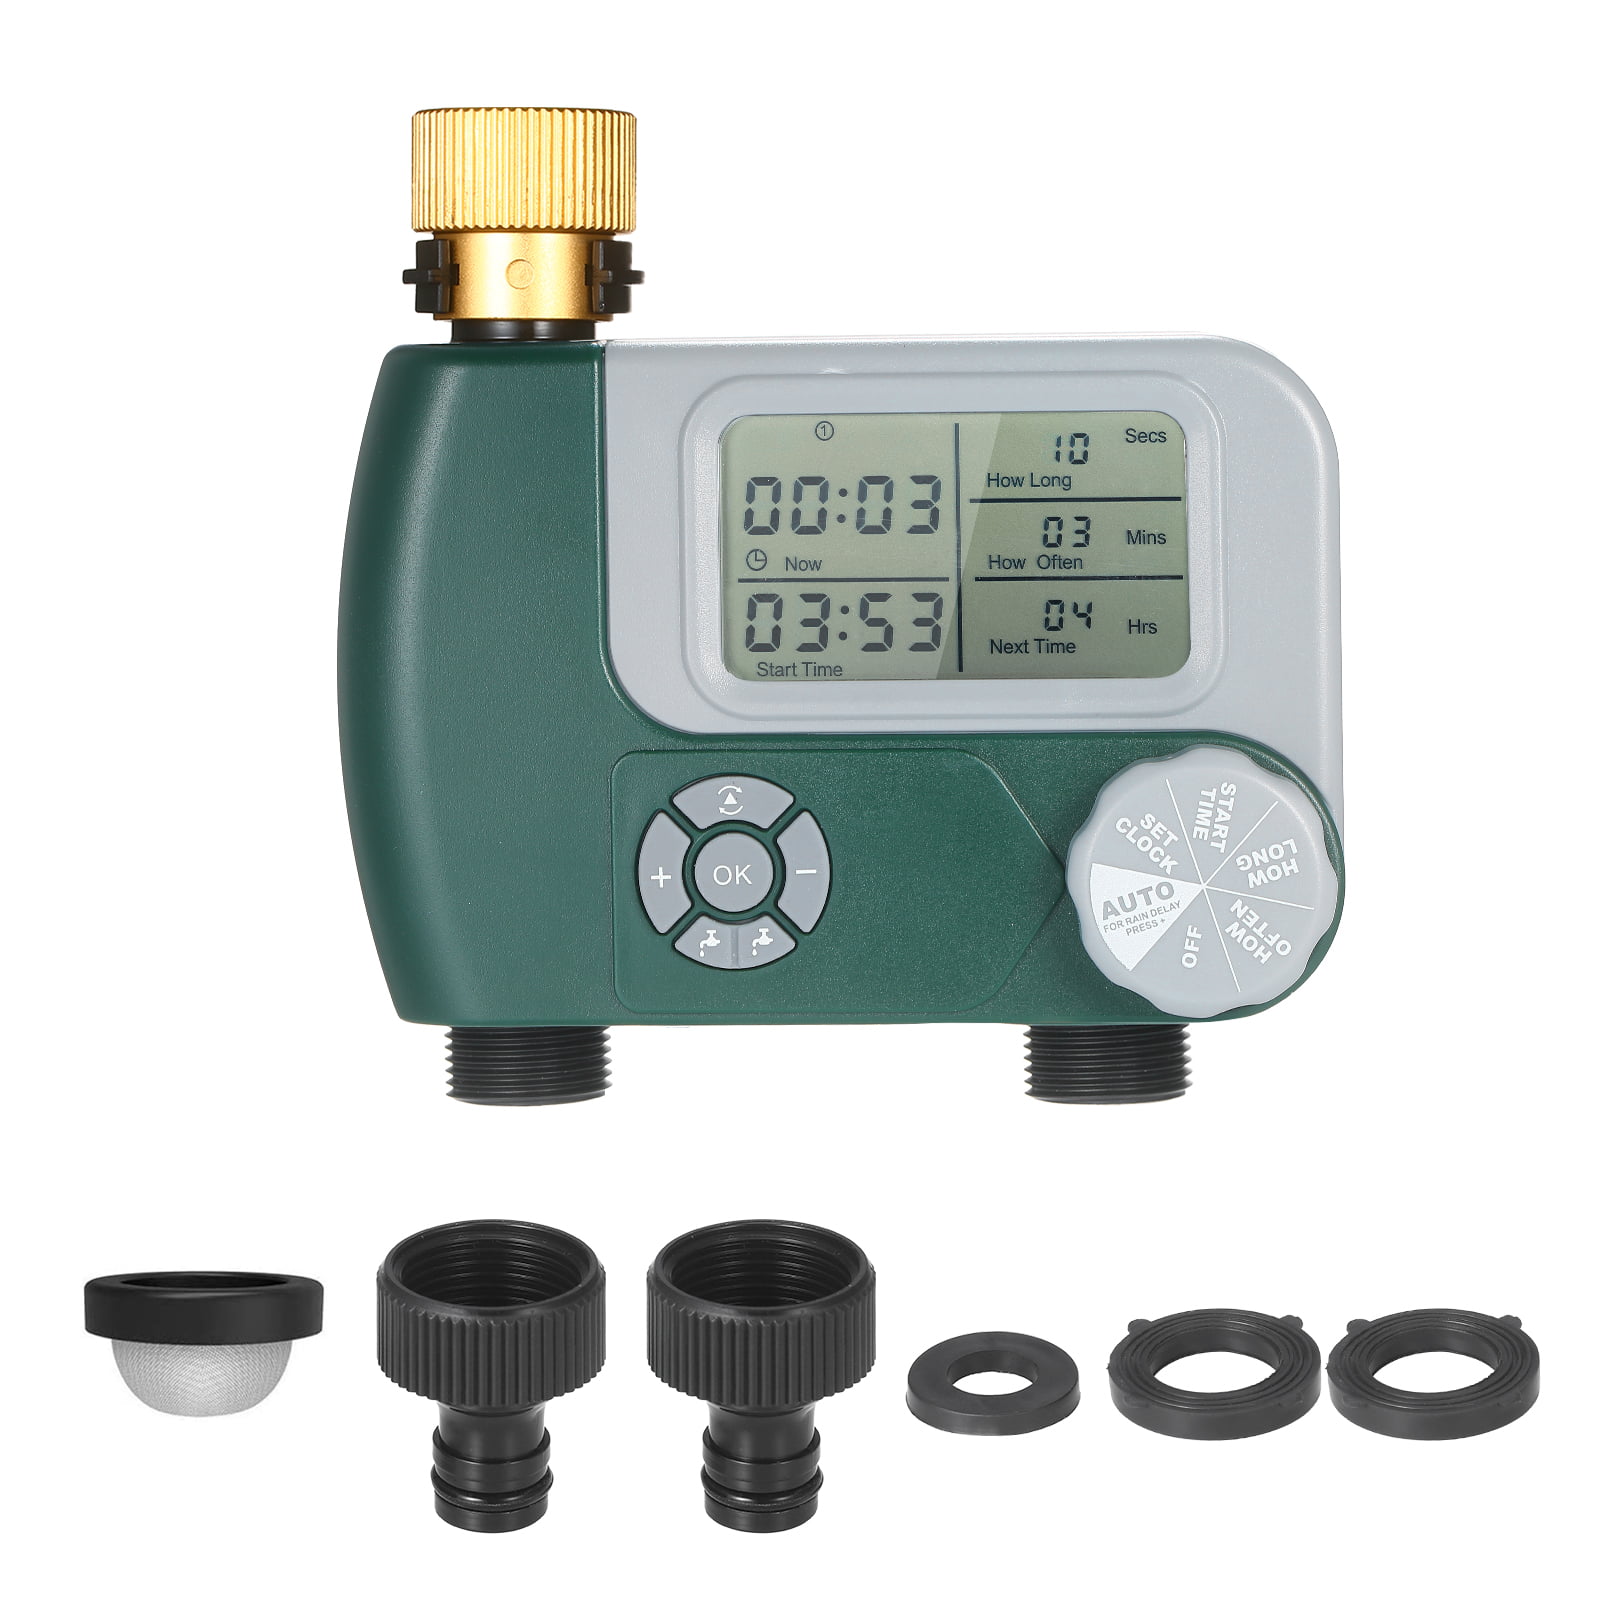 Programmable Digital Hose Timer Outdoor, Timers For Watering Your Garden